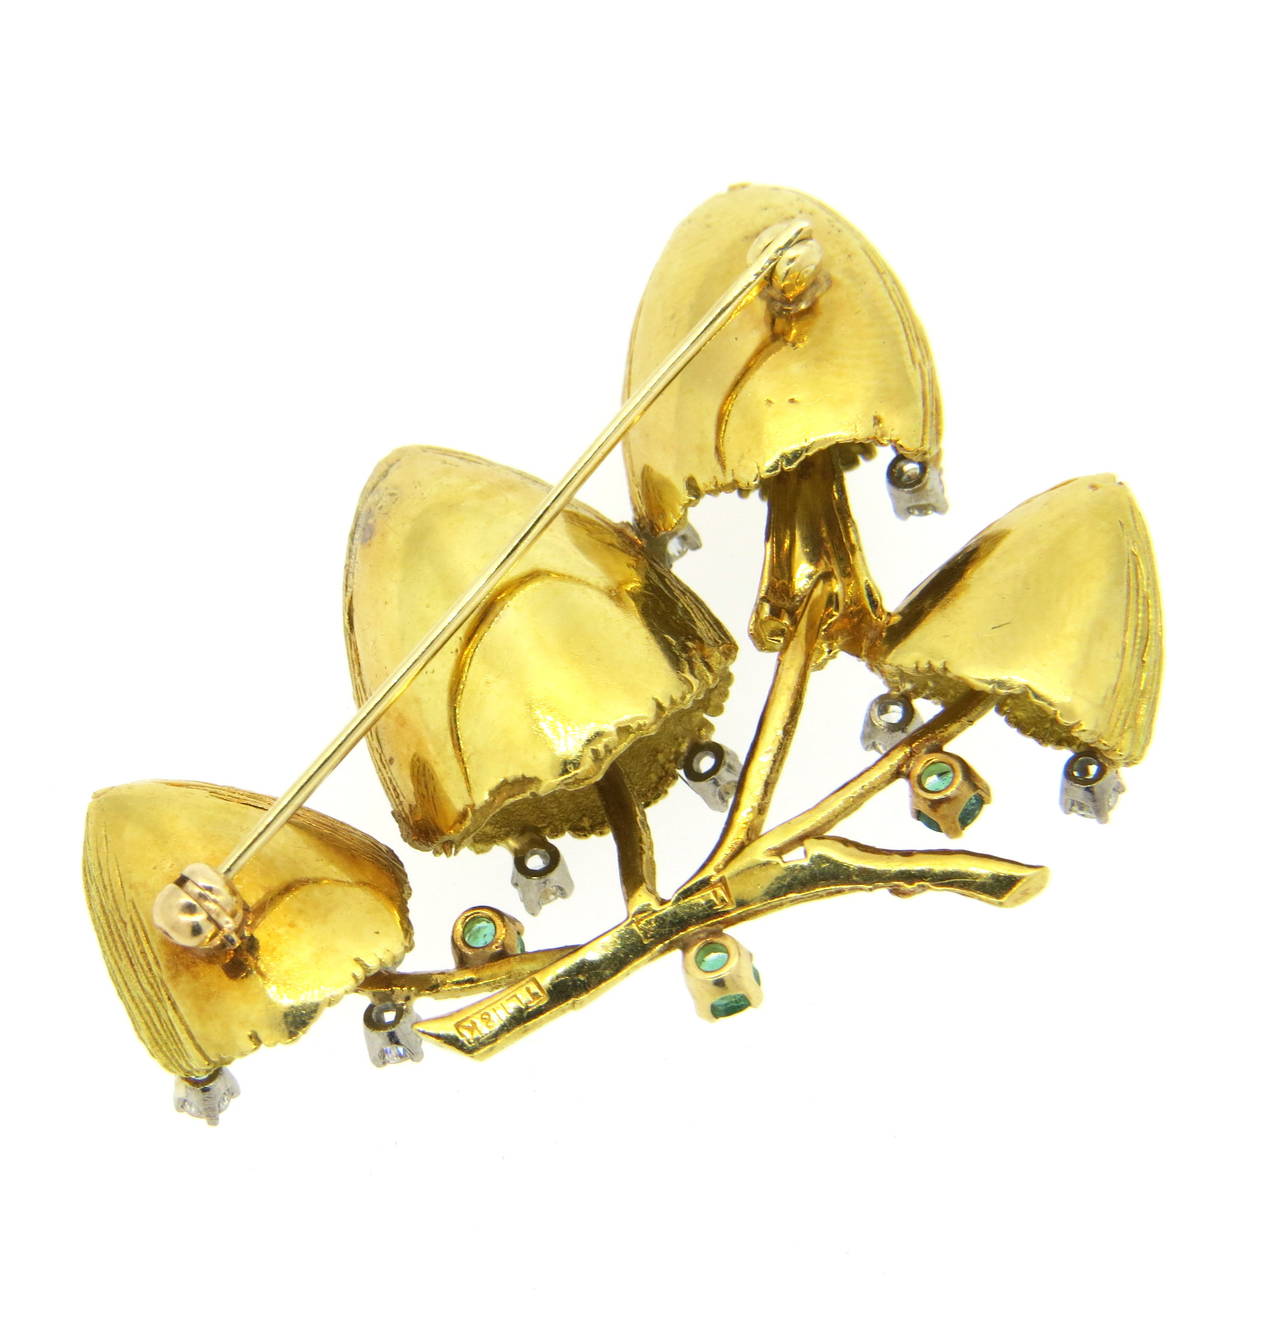 18k gold mushrooms brooch, decorated with approx. 0.27ctw in diamonds and emeralds. Brooch measures 45mm x 35mm. Weight of the piece - 21.8 grams